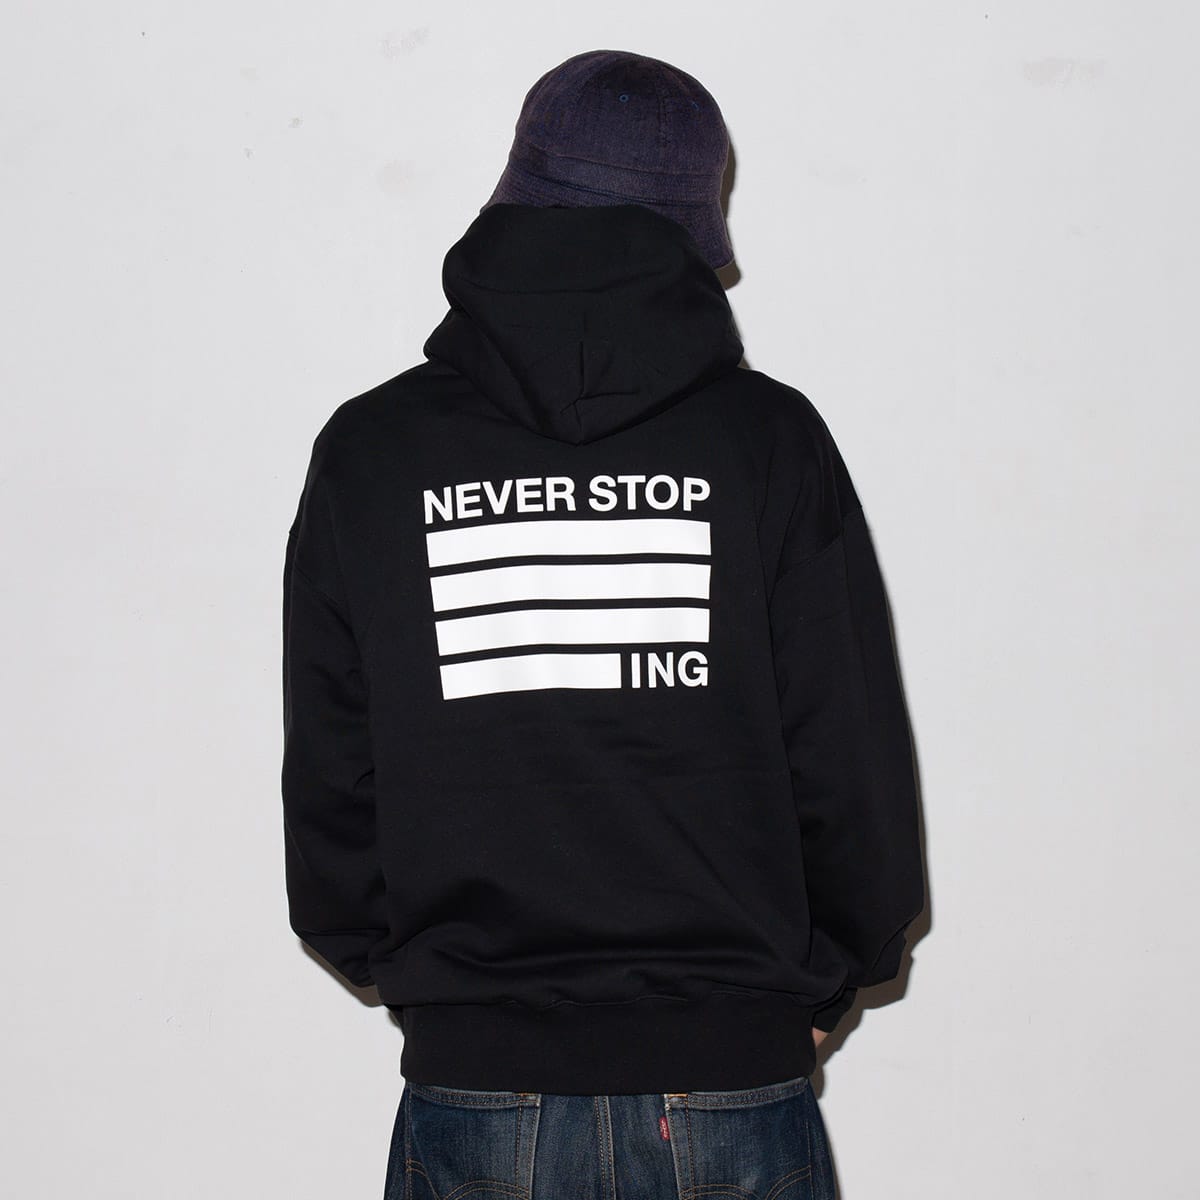 THE NORTH FACE NEVER STOP ING HOODIE BLACK 23FW-I